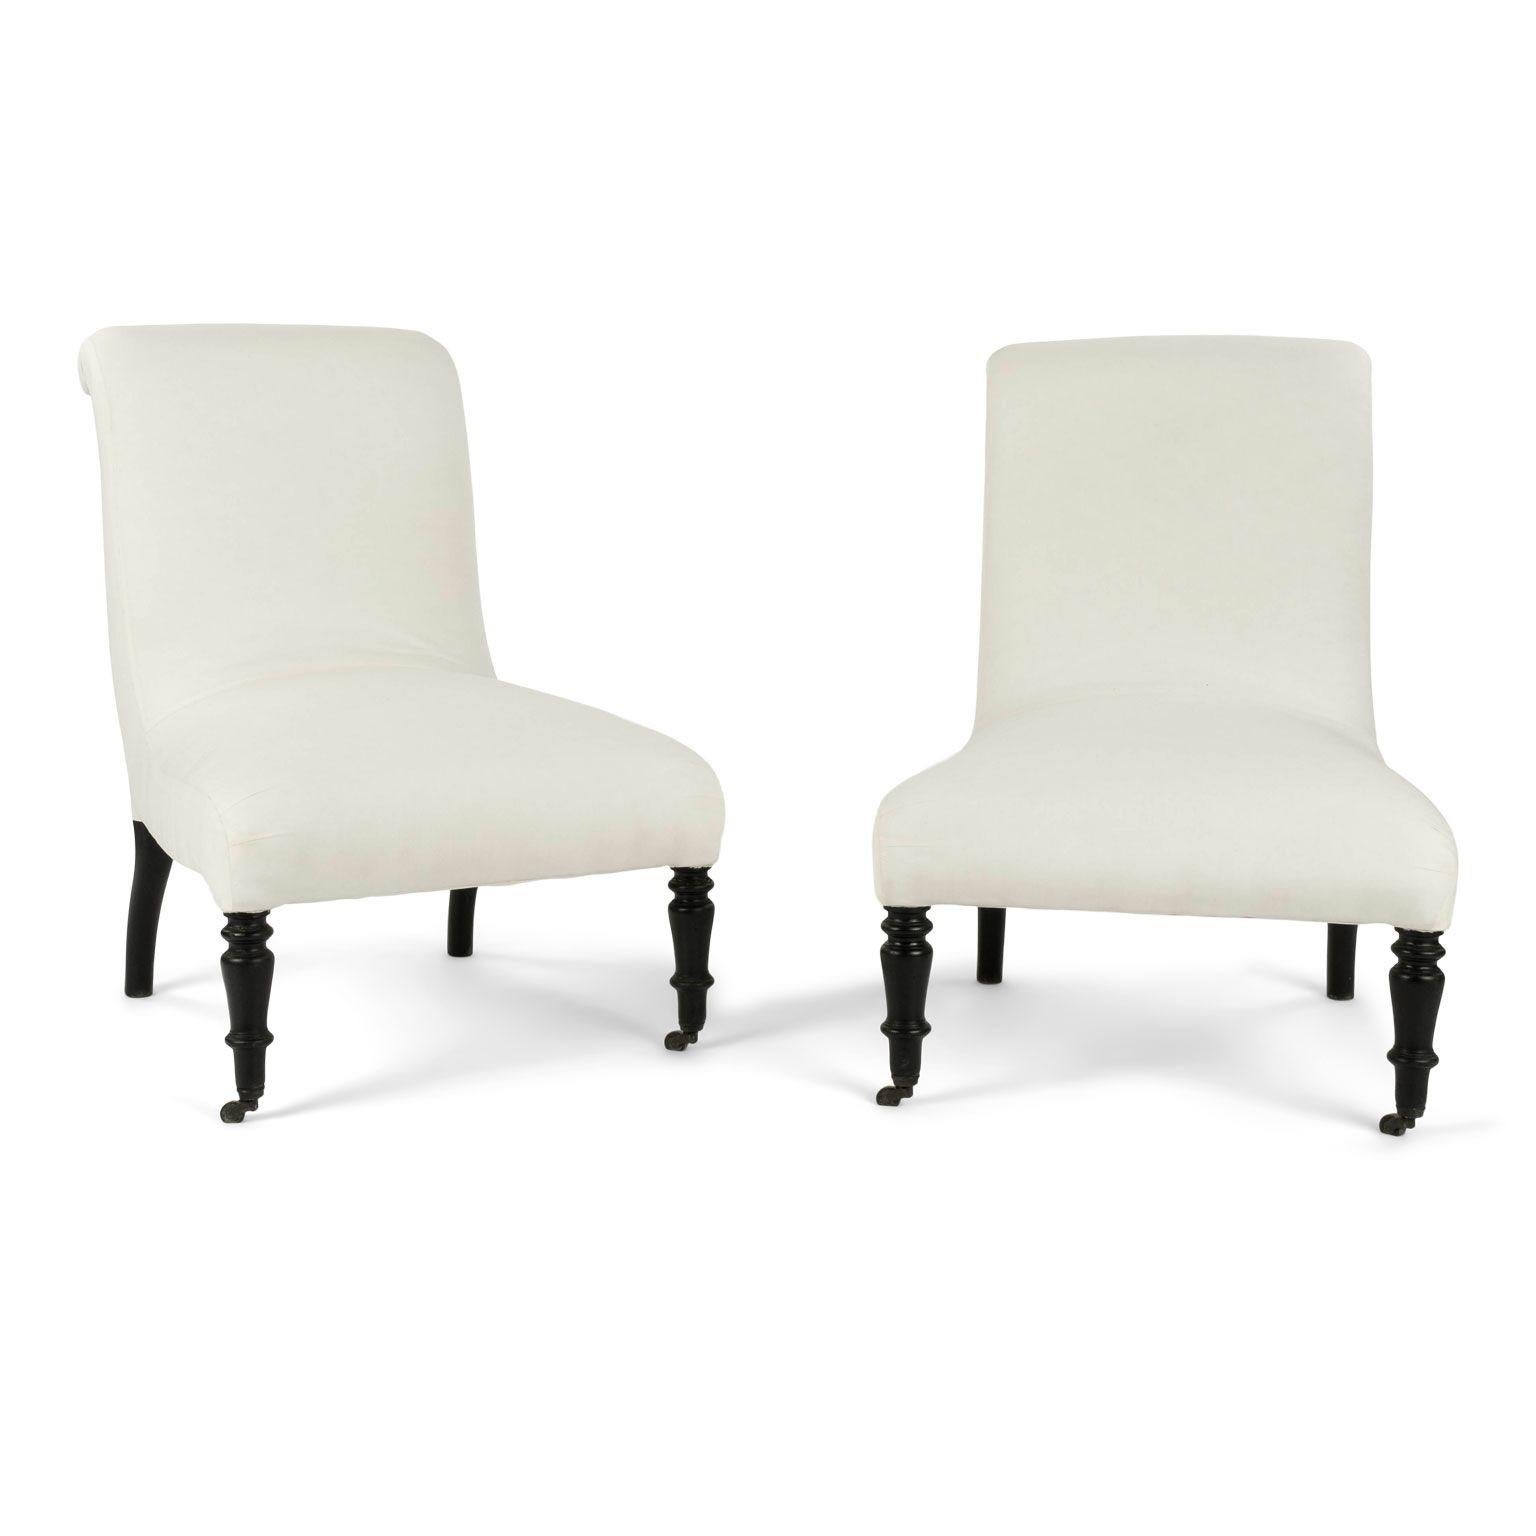 Pair of French Napoleon III slipper chairs circa 1870-1890. Newly upholstered in off-white muslin. Ebonized legs. Later brass casters on front legs. Two available and sold together and priced $5,600 for the pair.